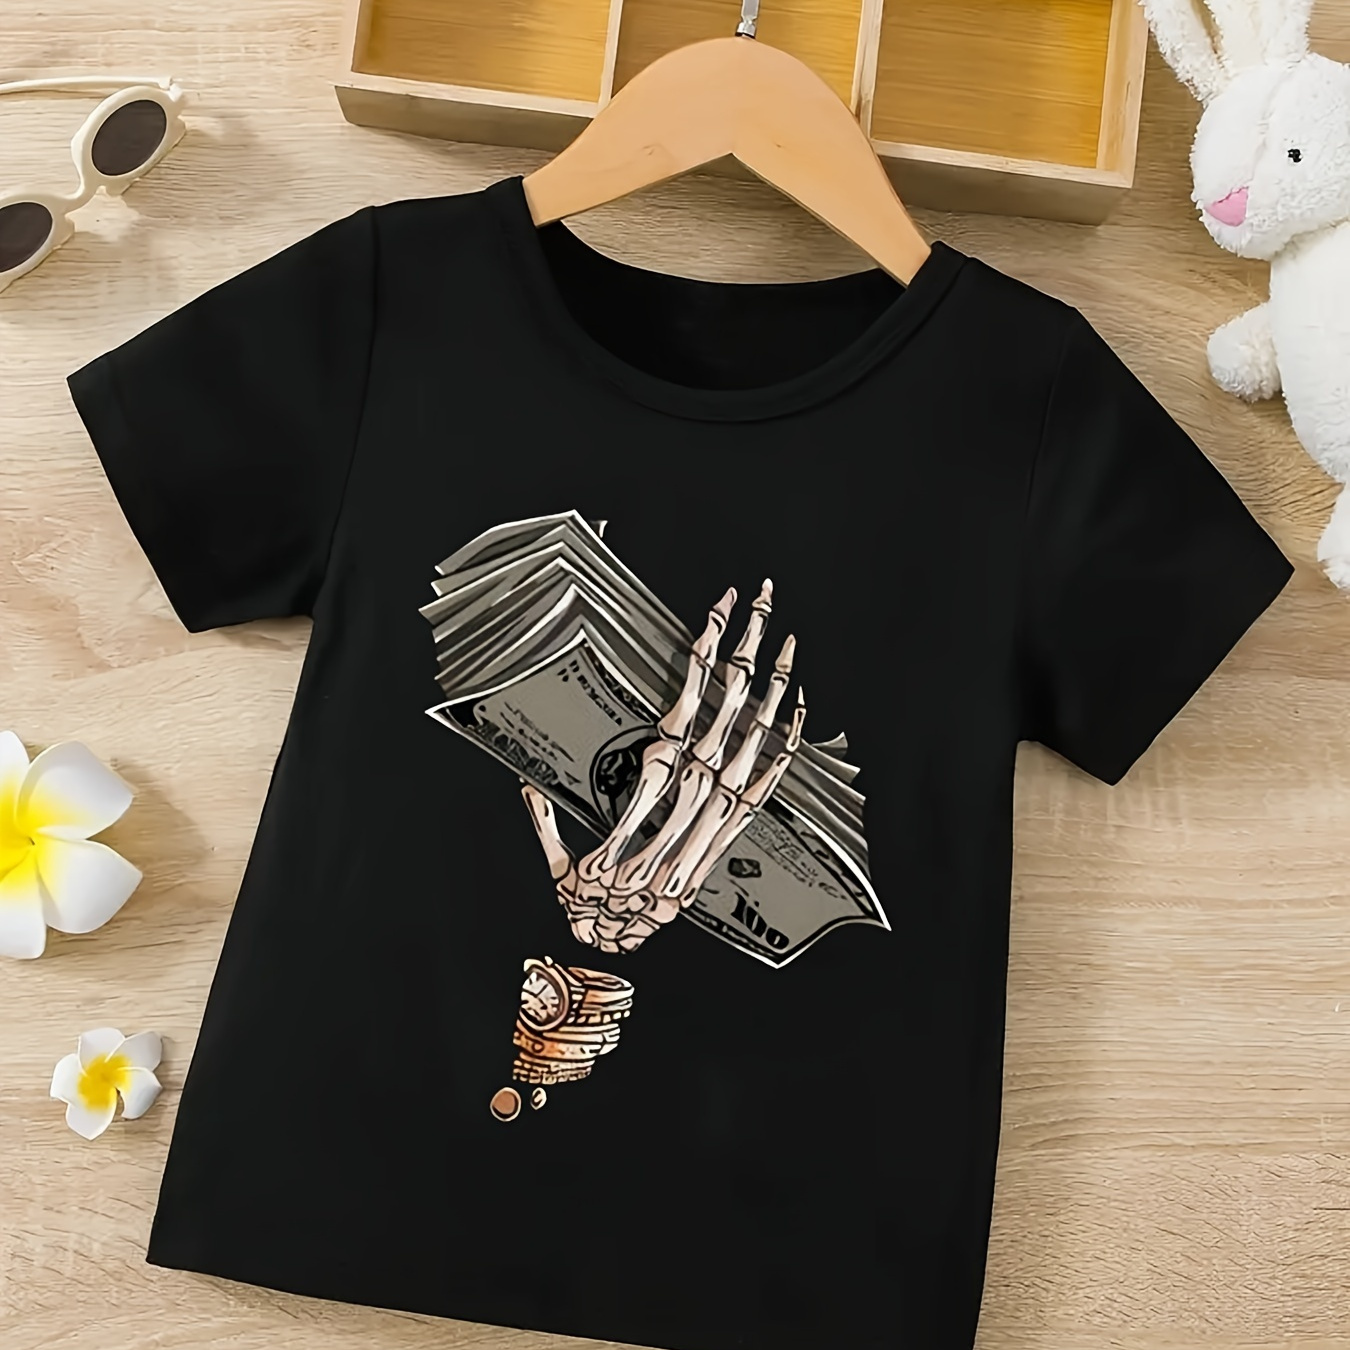 

Skeleton And Cash Graphic Short Sleeve Crew Neck T-shirt, Casual Tee Tops Summer Gift, Boys' Clothing